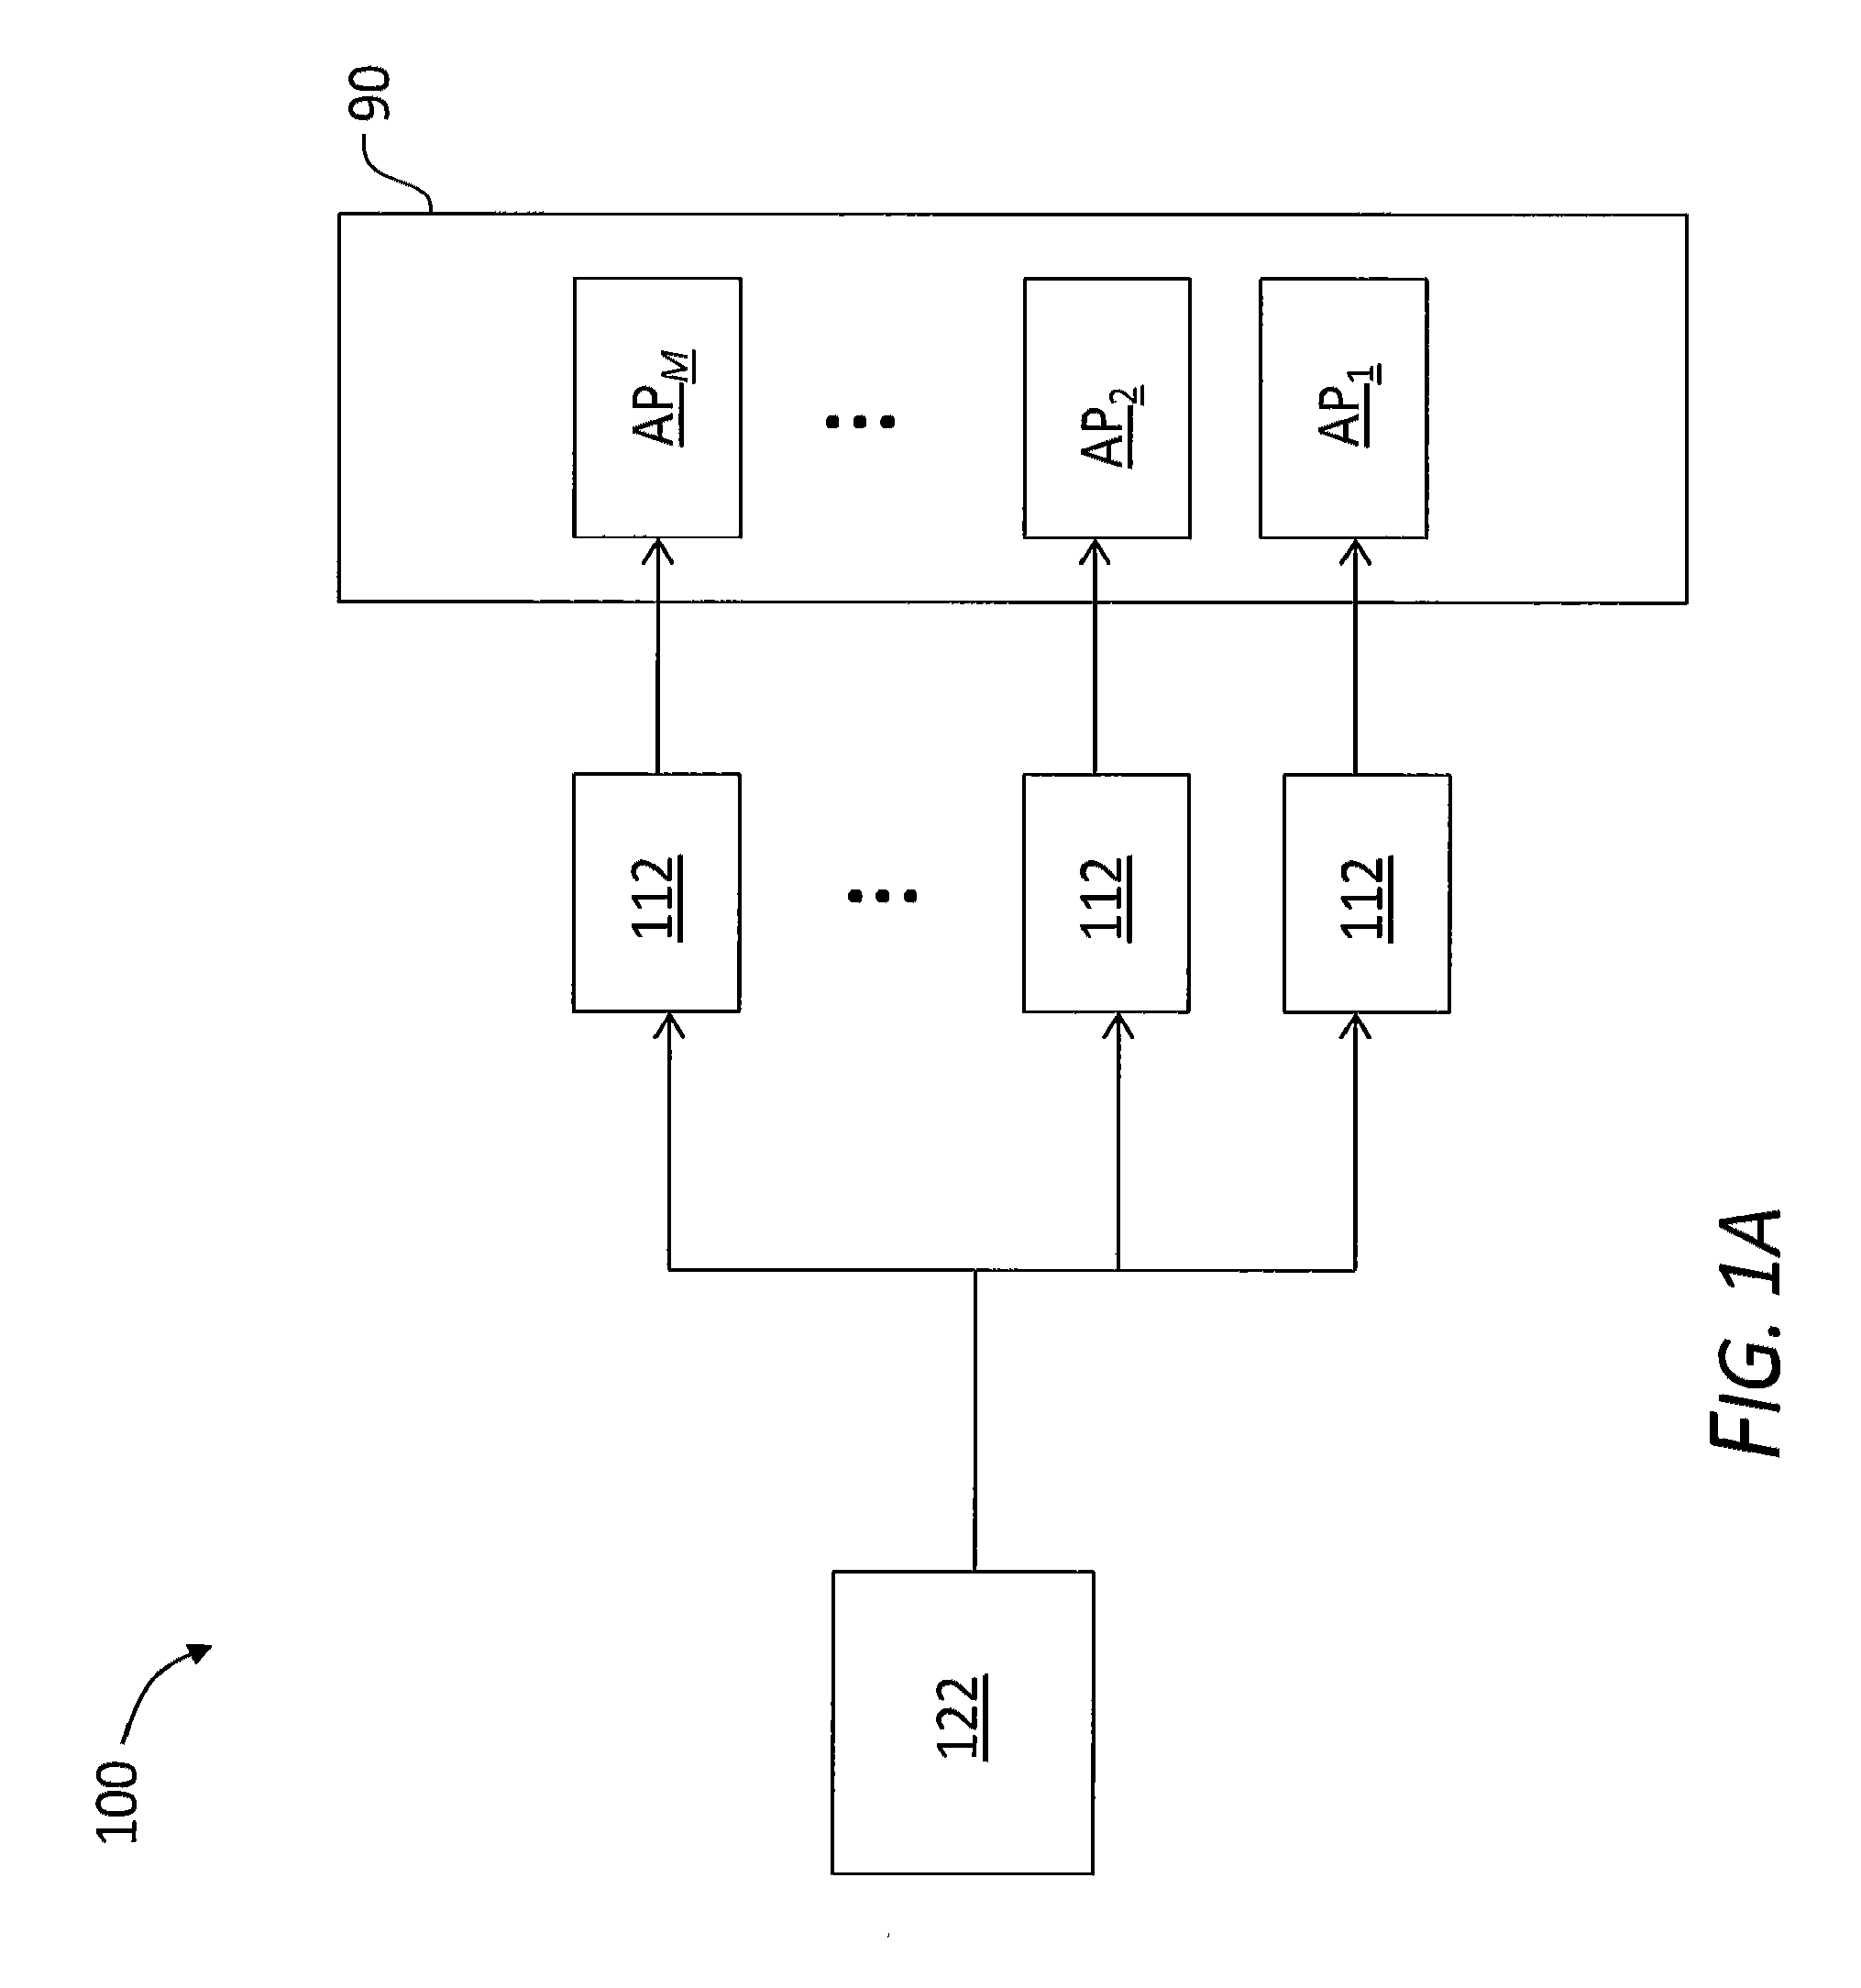 Methods and apparatus for drying logs with microwaves using feedback and feed forward control